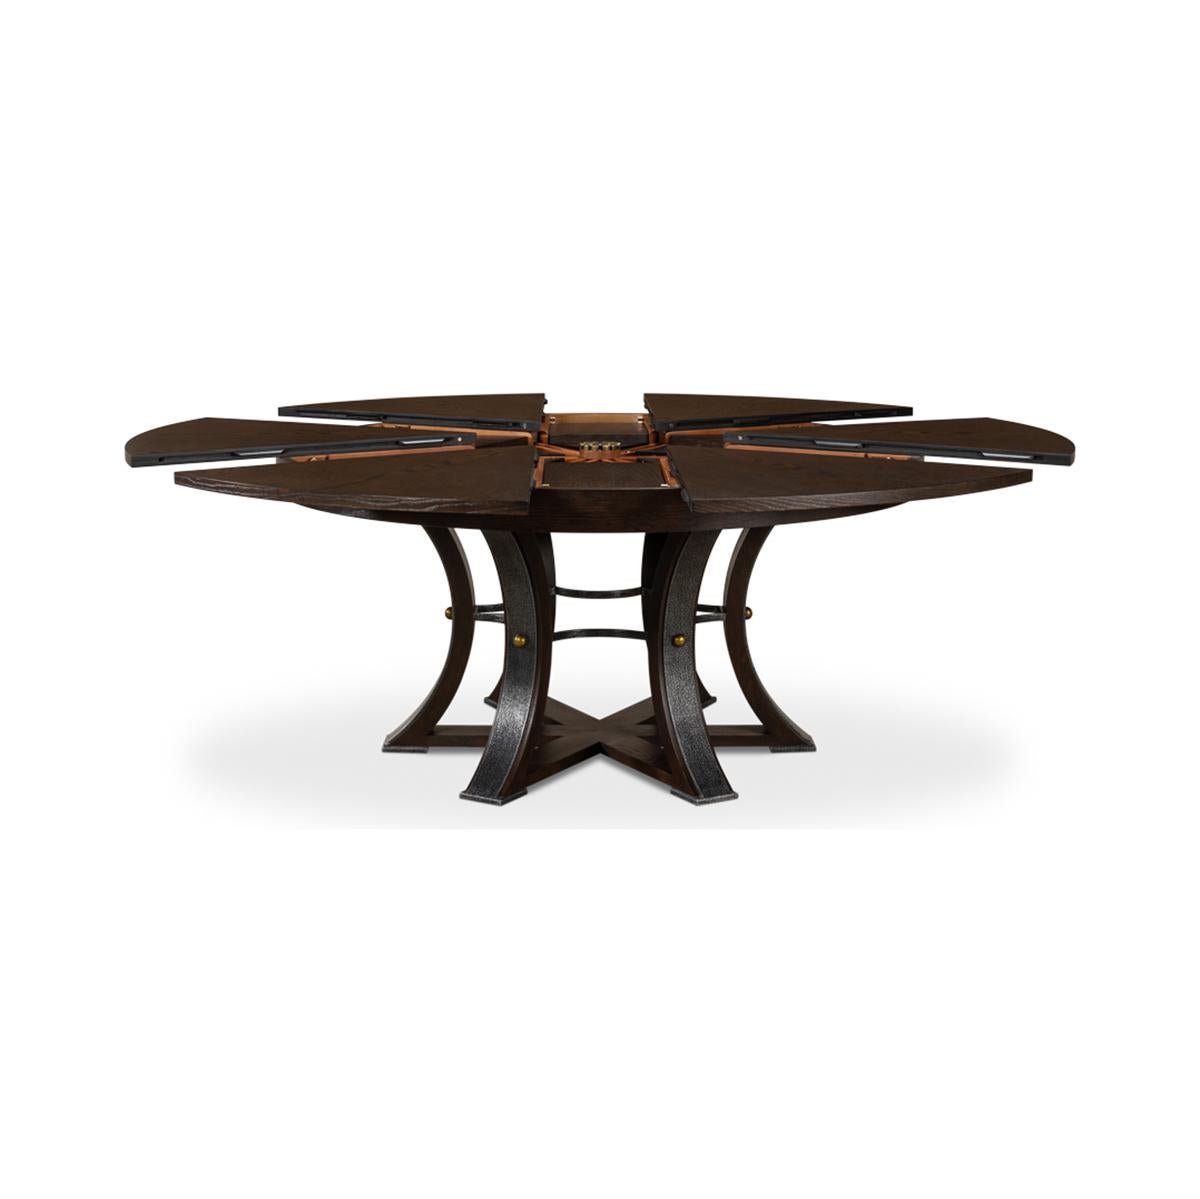 A modern industrial style round extending dining room table. Wire brushed oak top in our Burnt Brown finish with gunmetal iron accents to the simple geometric form base. The table opens and extends to 84